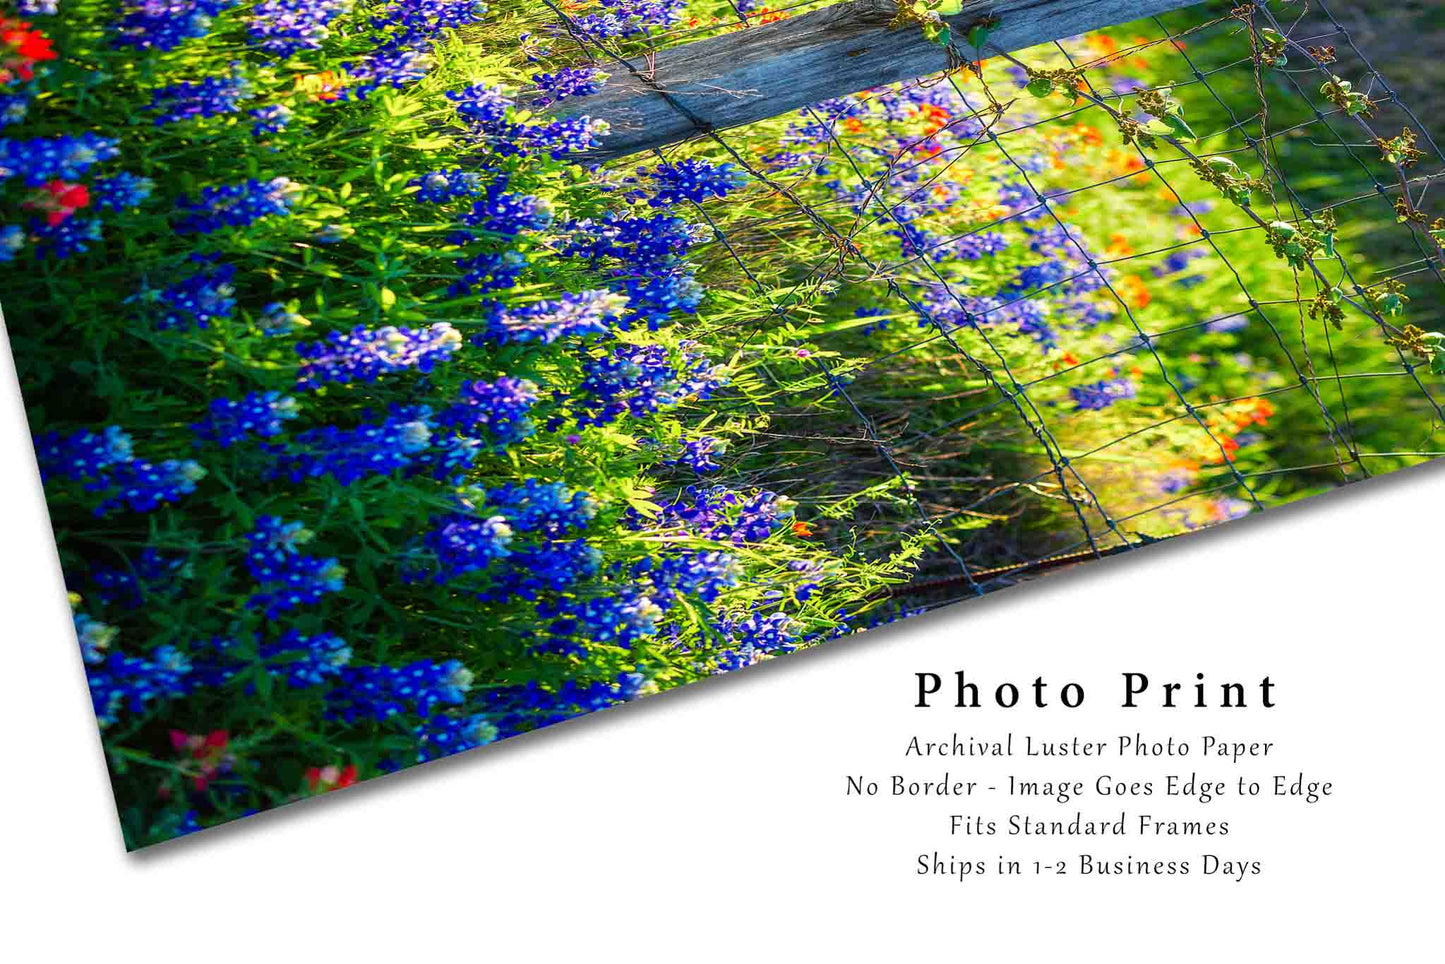 Wildflower Photo Print | Fence Post in Bluebonnets and Indian Paintbrush Picture | Texas Wall Art | Vertical Country Photography | Farmhouse Decor